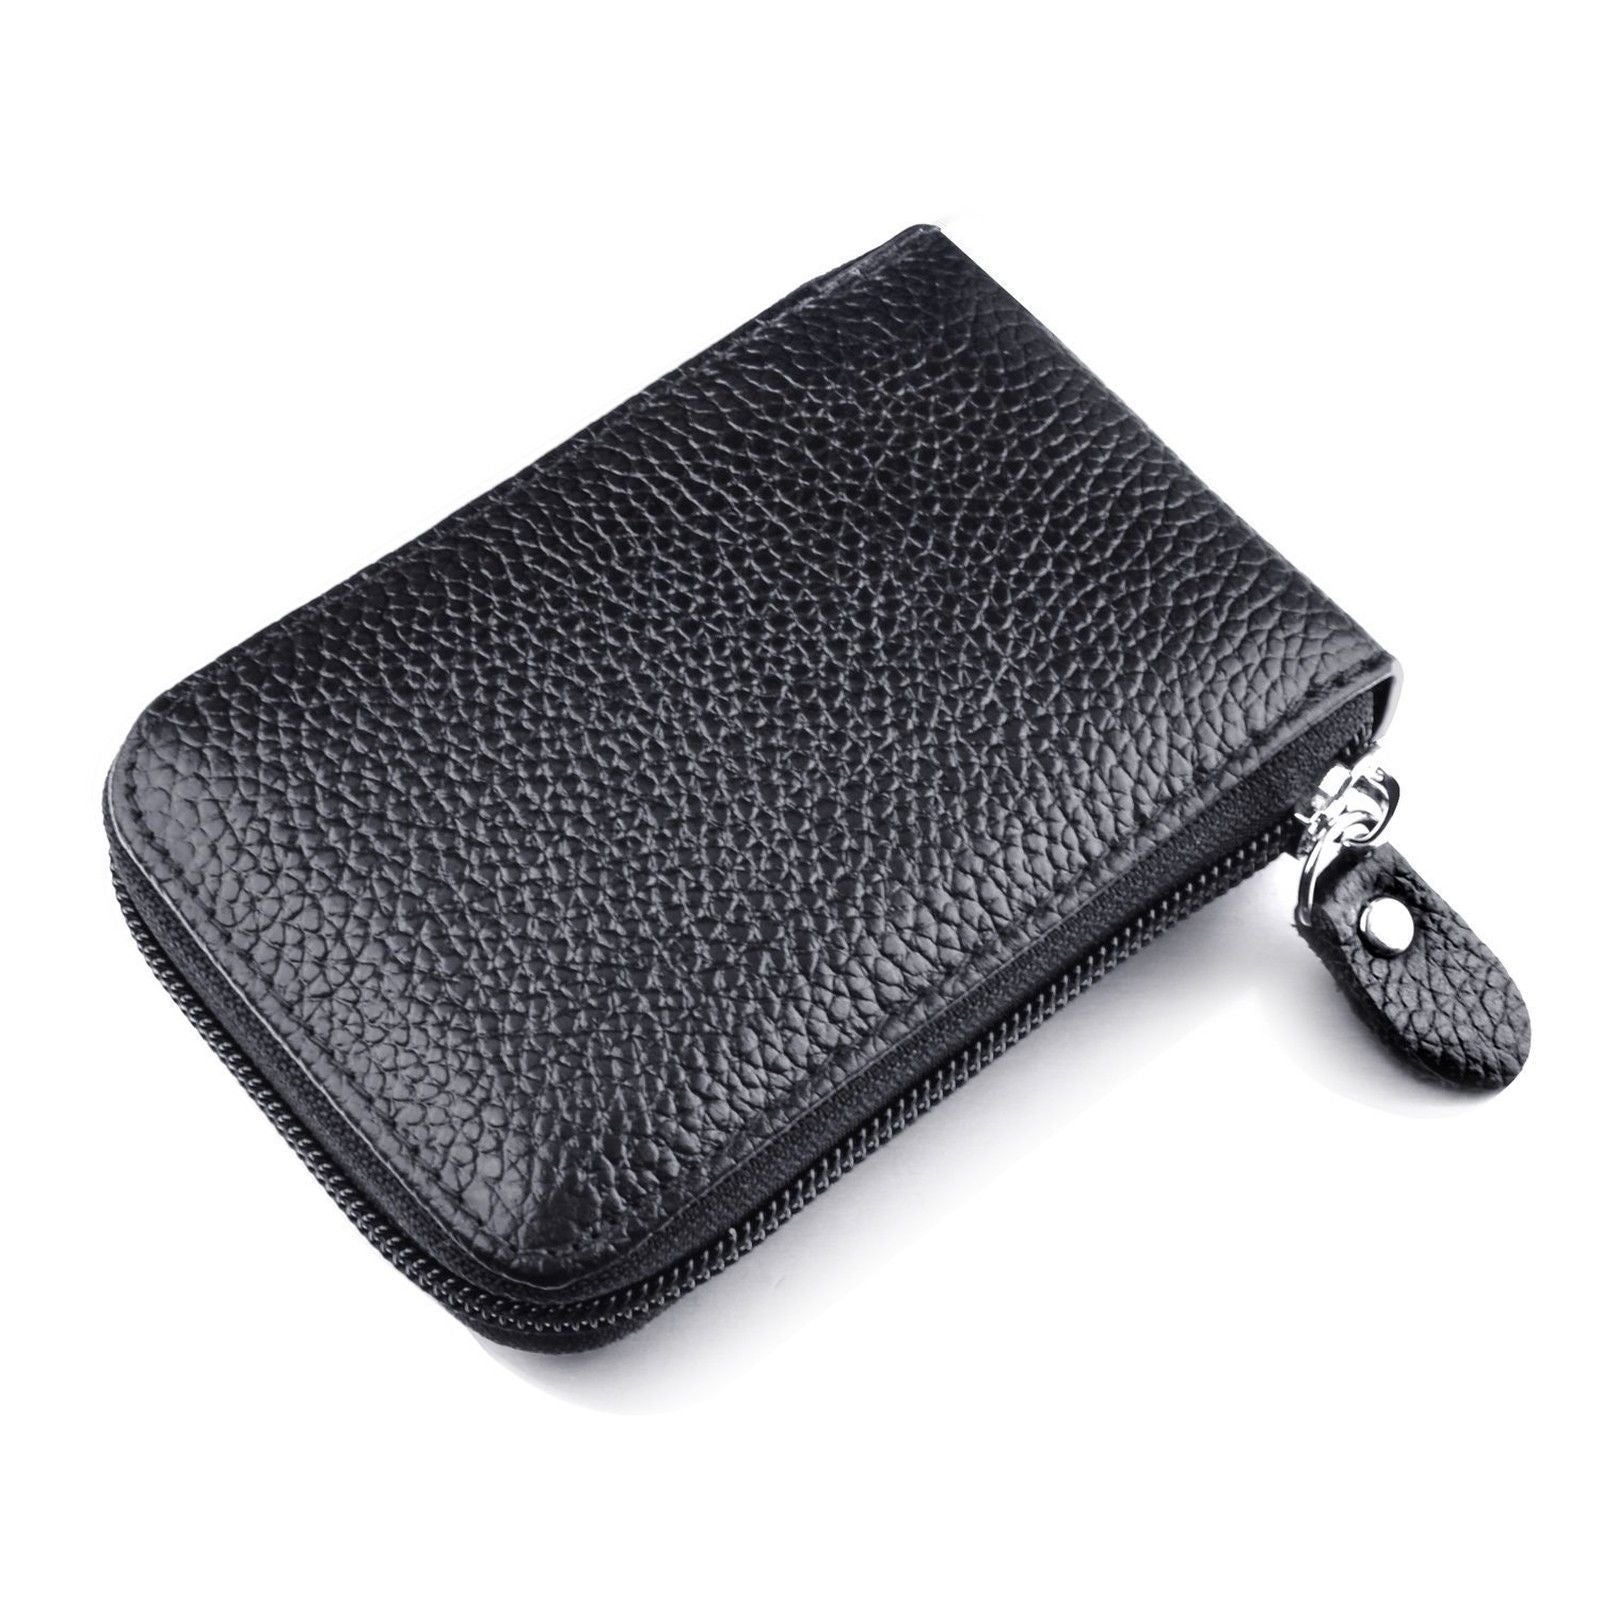 Organizer Compact PU Leather Wallet